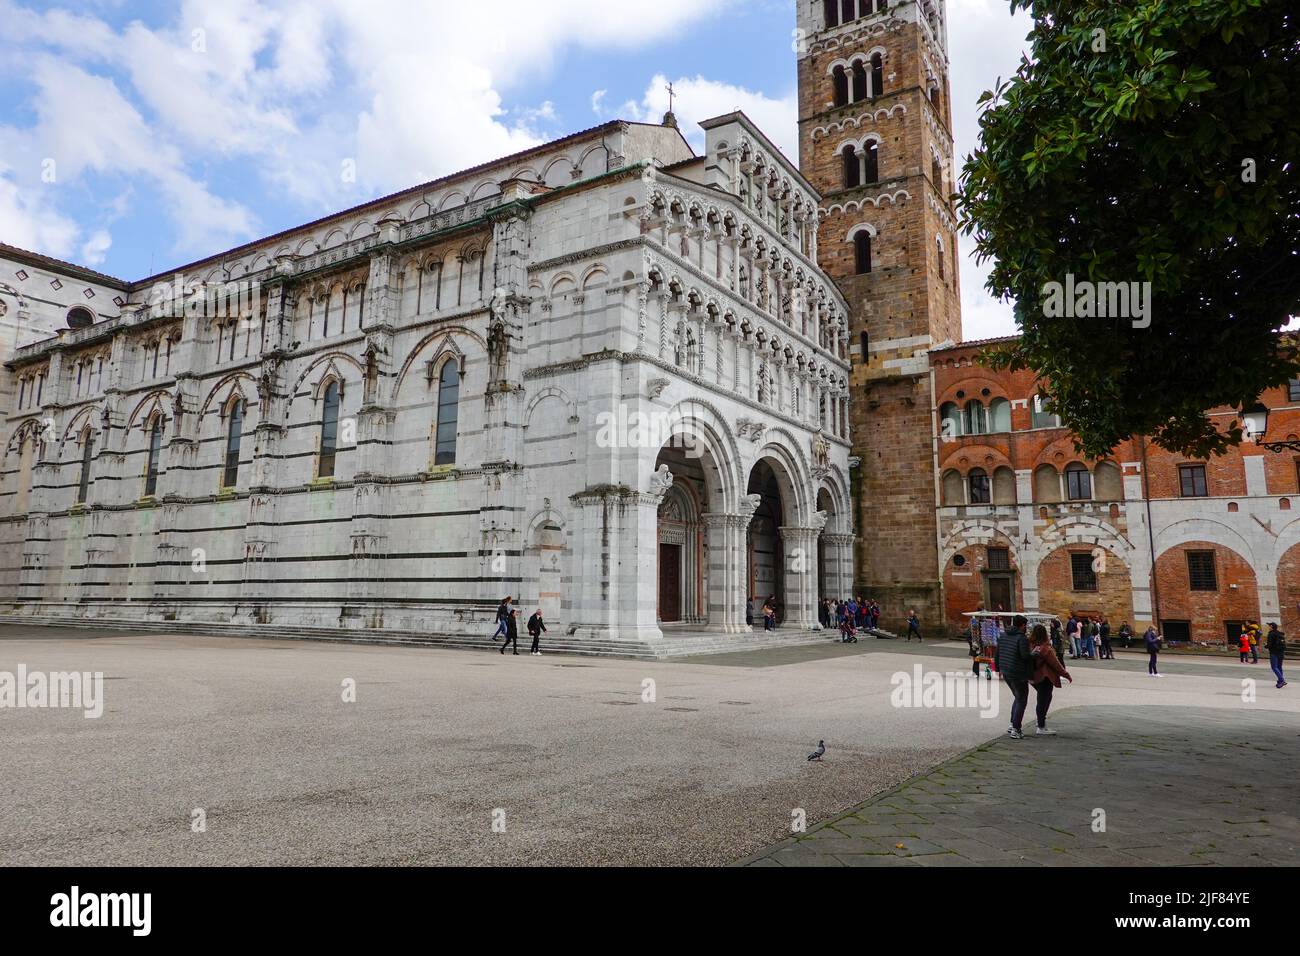 People in the Piazza San Martino in front of the Duomo of Luca, Italy, a part of Tuscany. Stock Photo